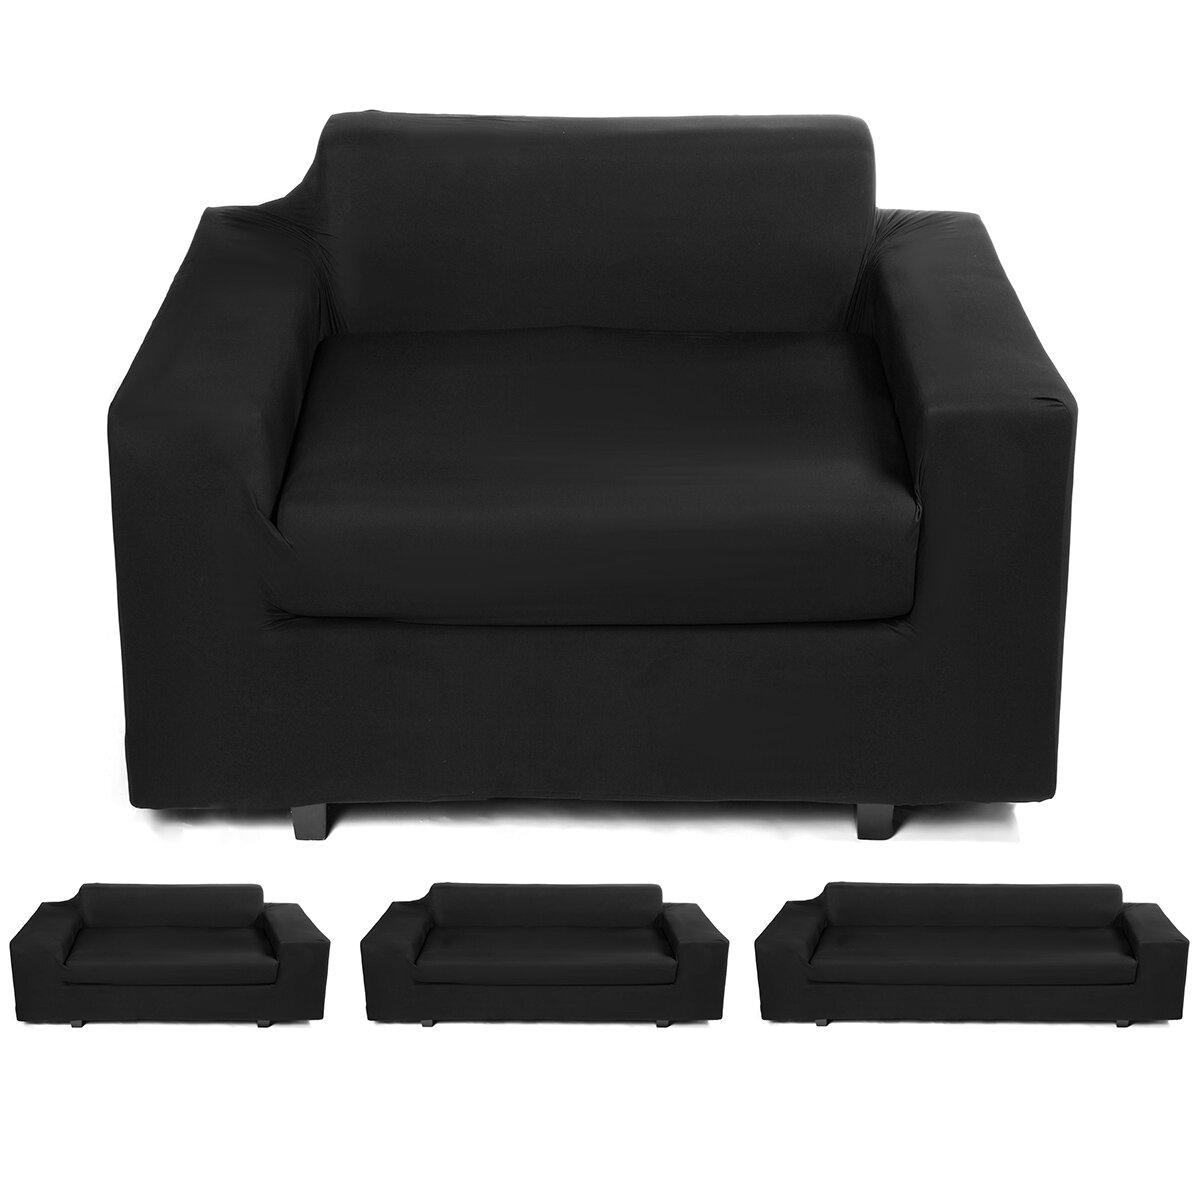 

1/2/3/4 Seaters Elastic Sofa Cover Universal Chair Seat Protector Couch Case Stretch Slipcover Home Office Furniture Dec